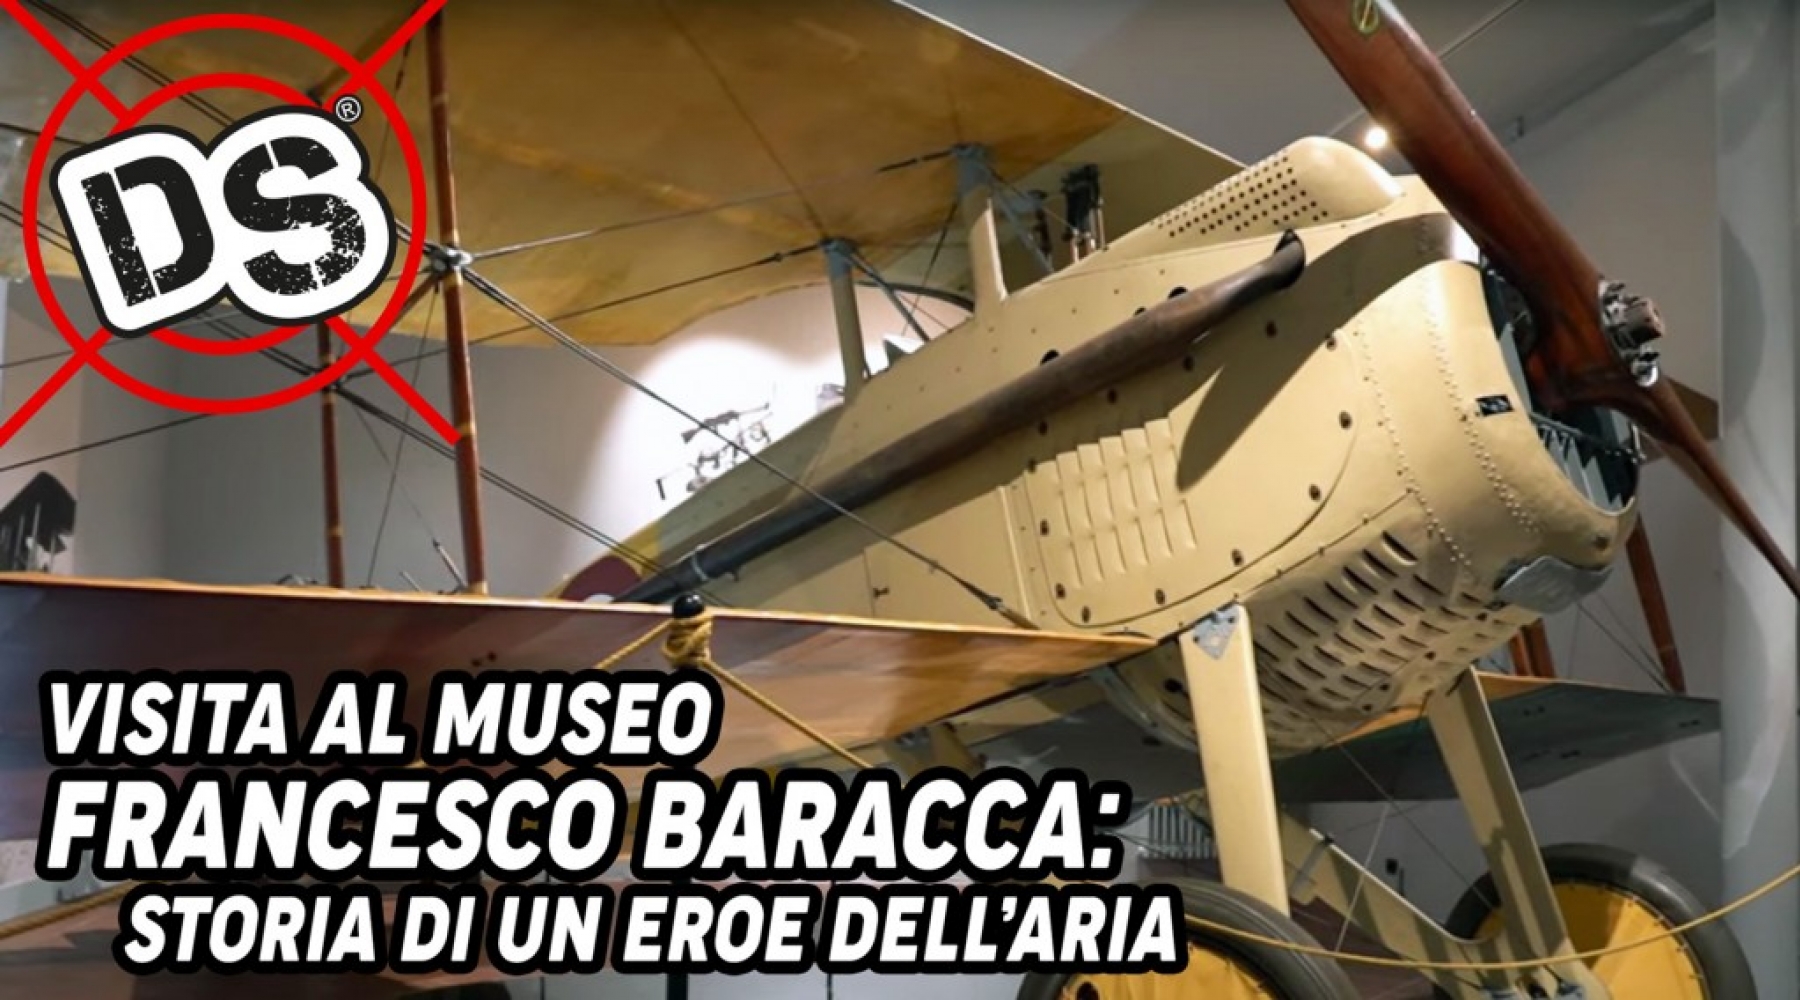 Baracca Museum, in the house of the hero of Italian military aviation